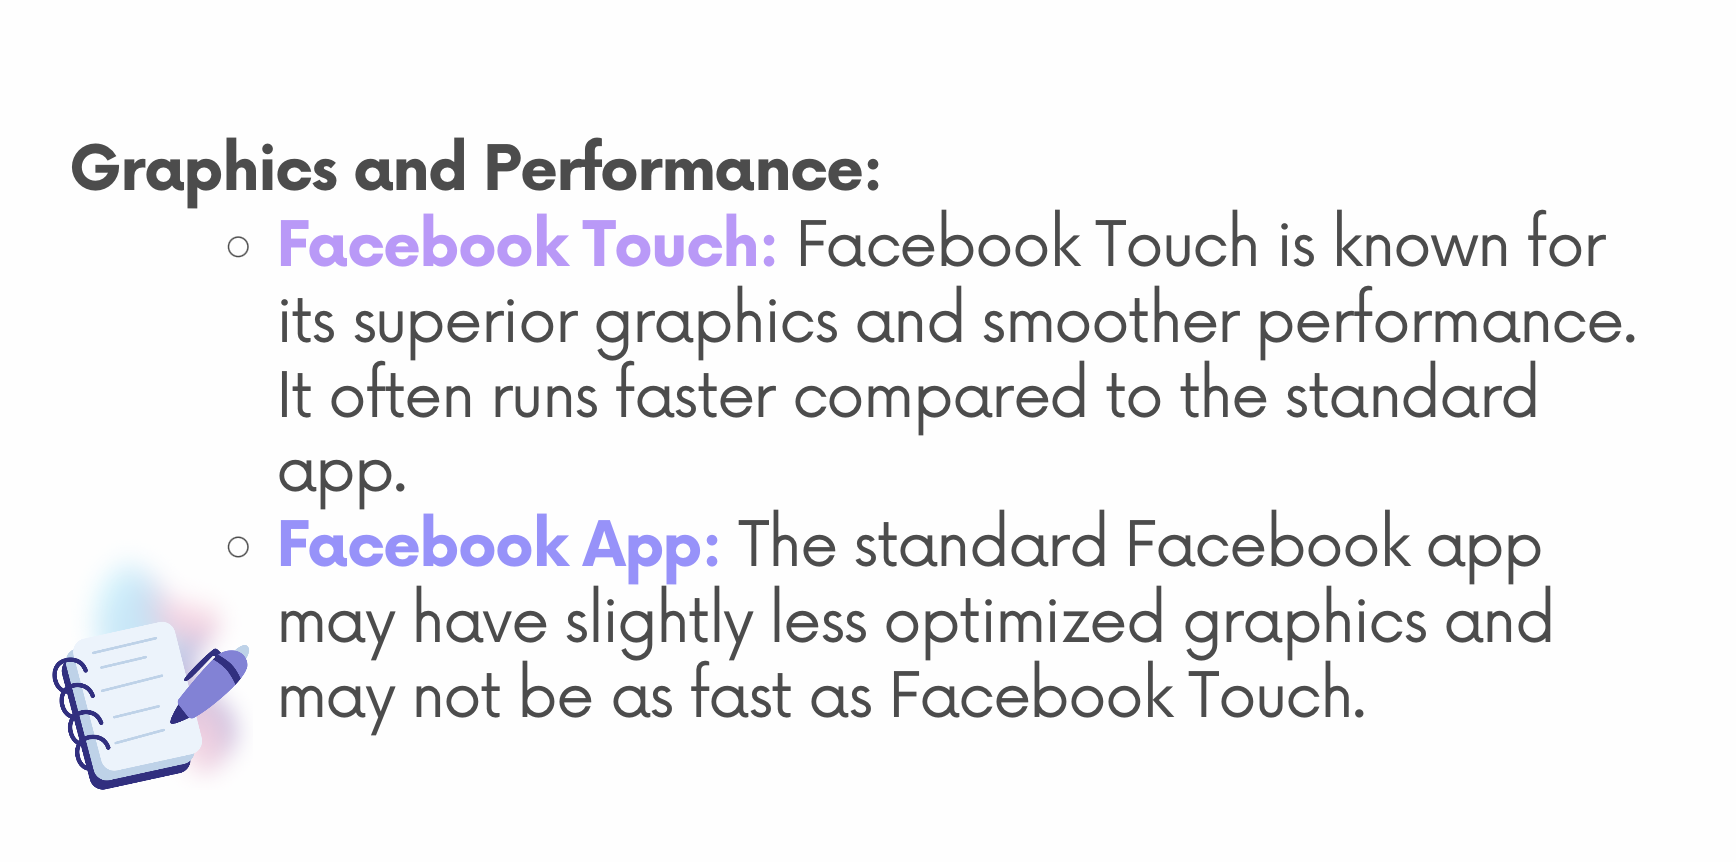 explanation: Differences between Facebook Touch and Facebook 